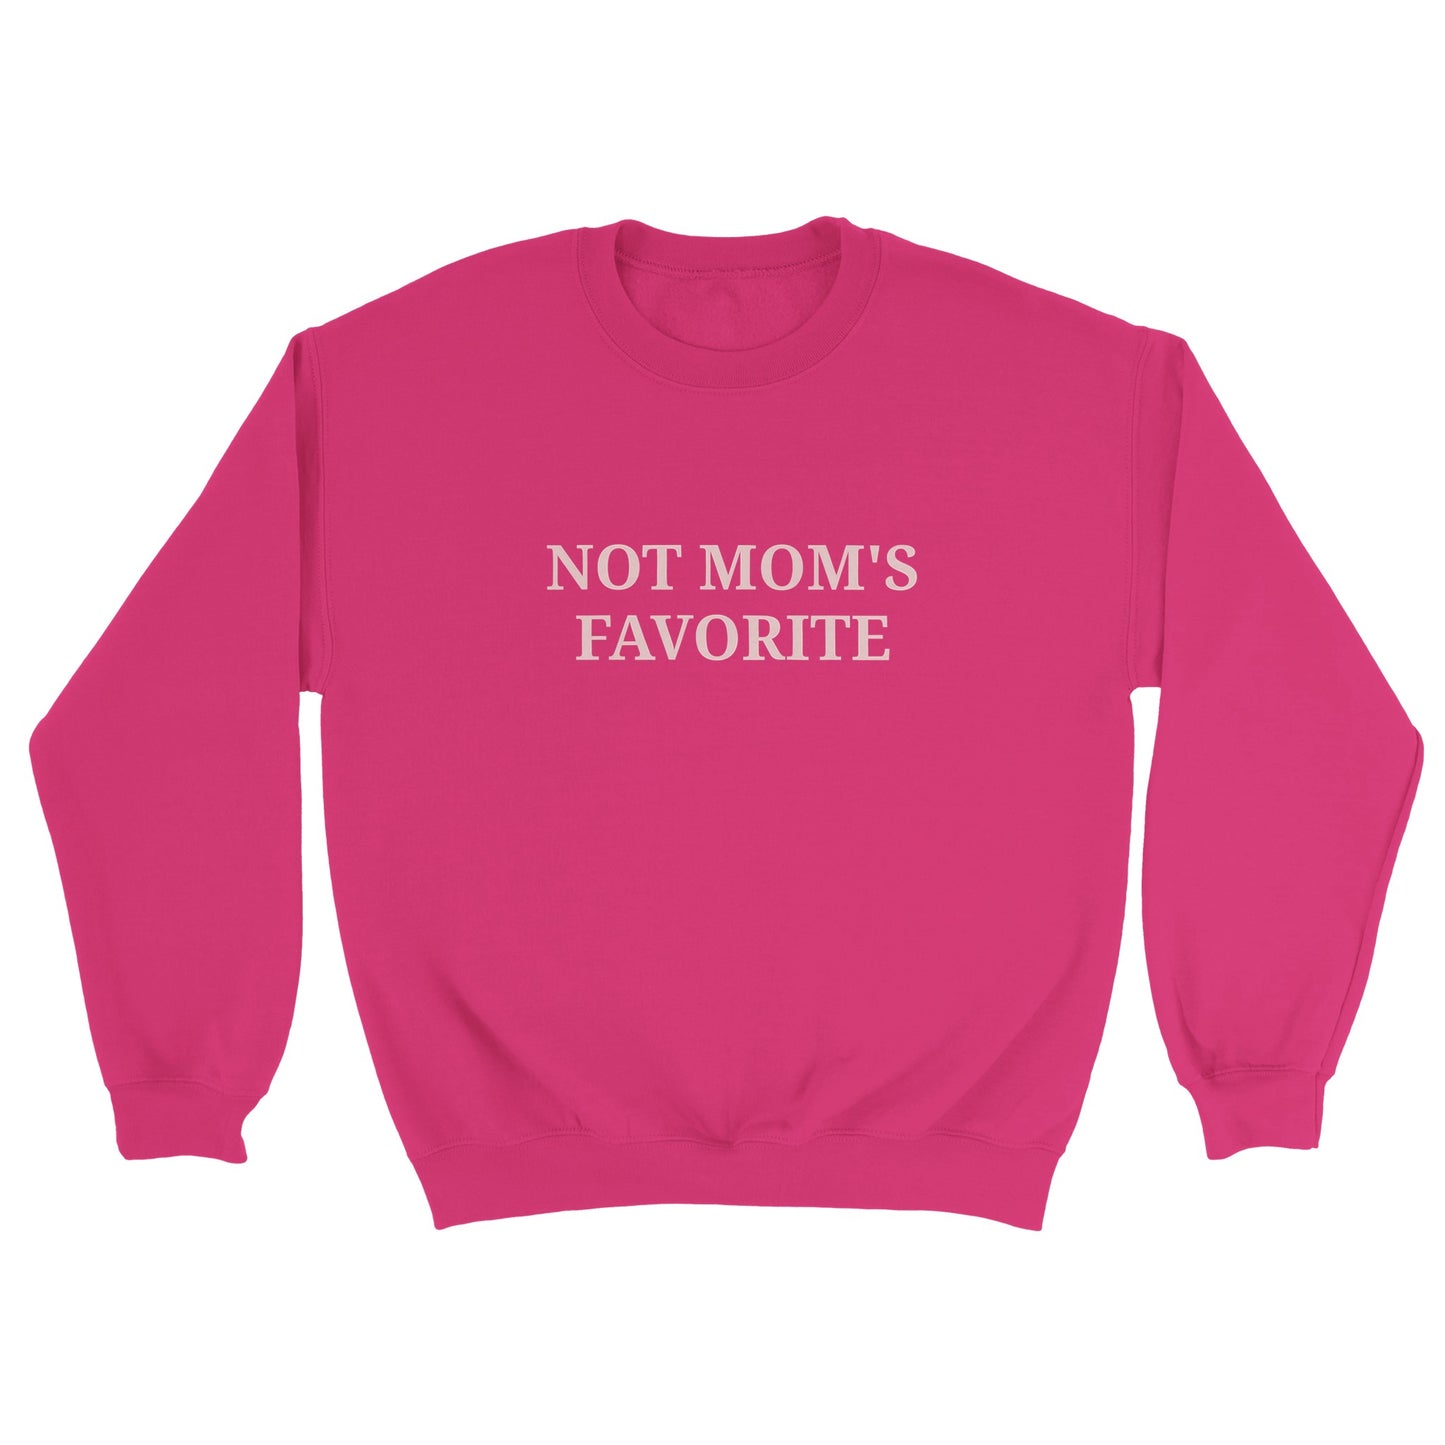 a pink sweatshirt with "Not mom's favorite" written across the chest